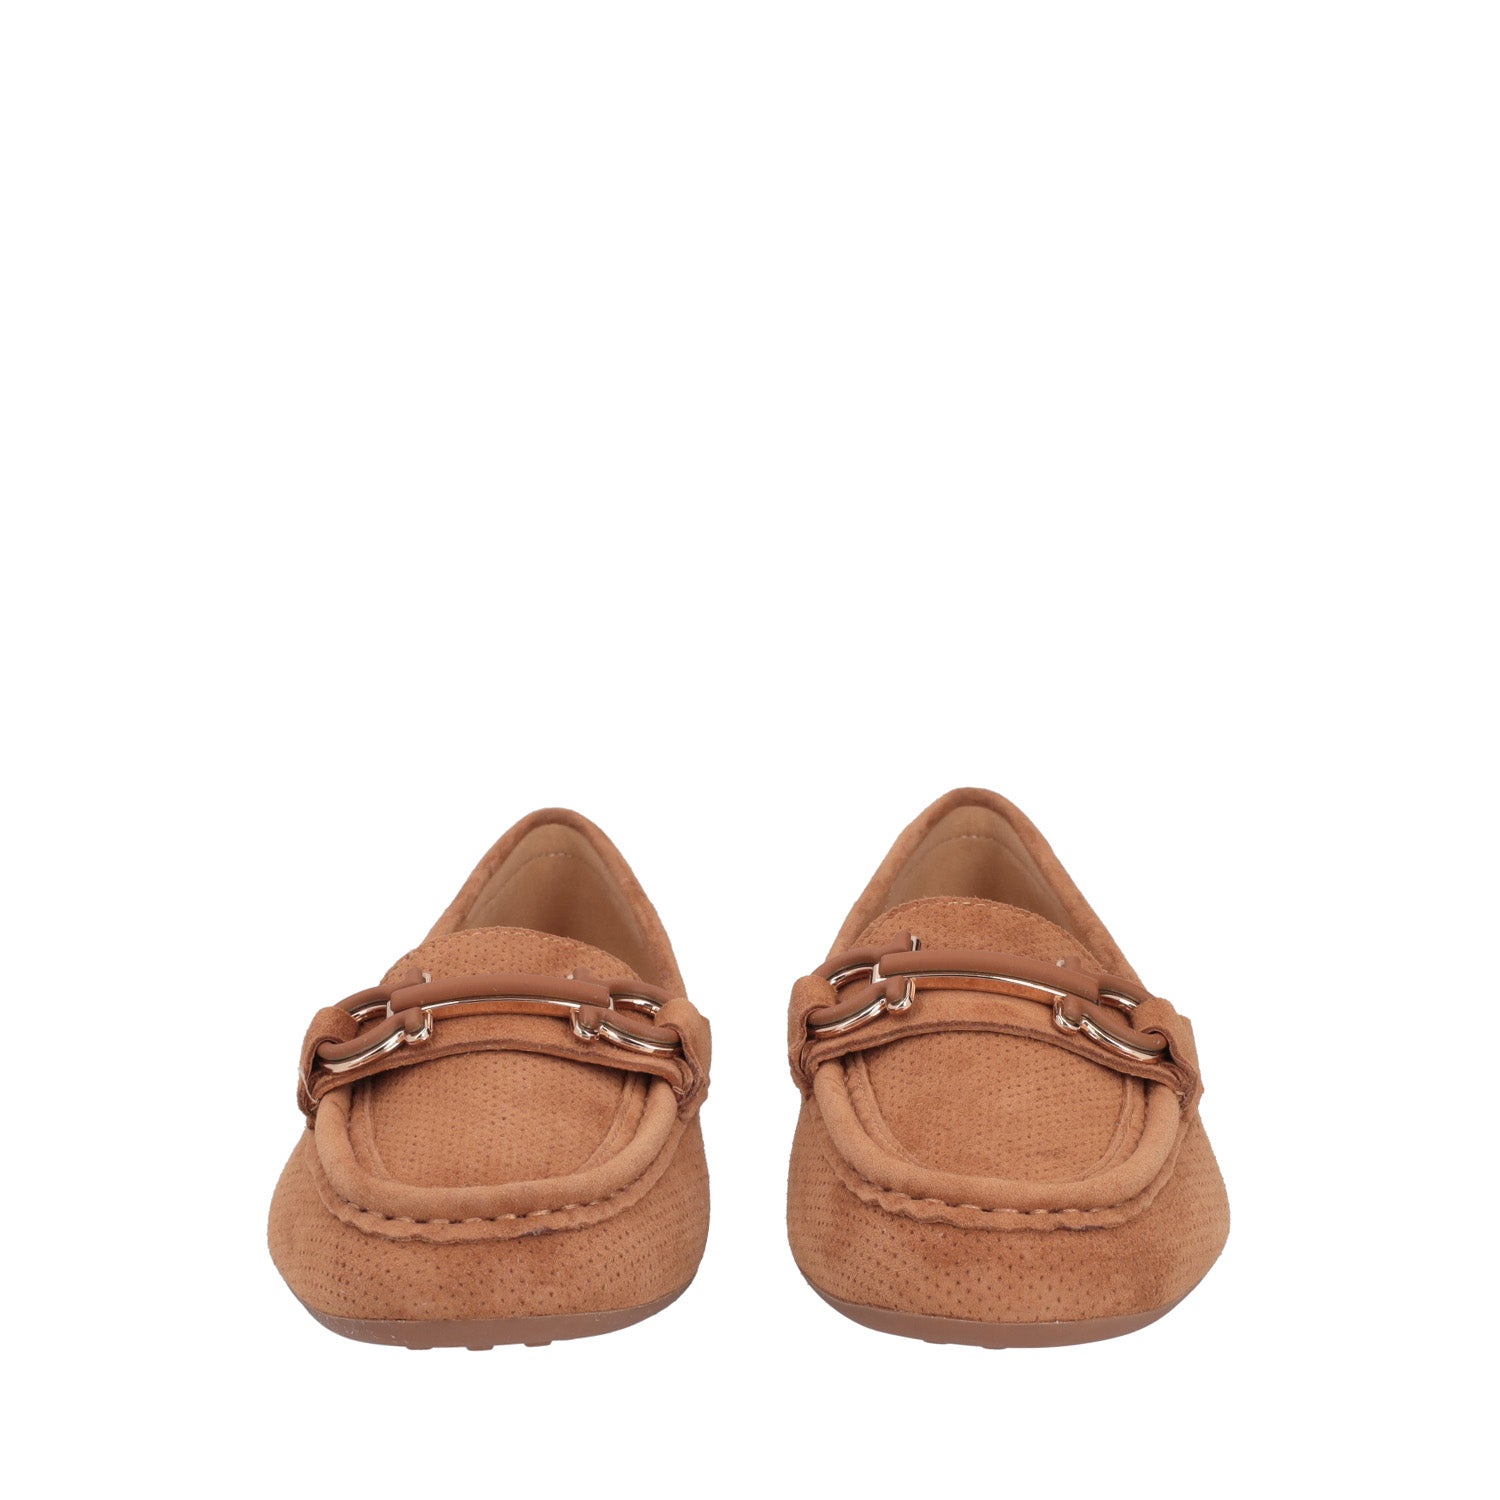 TAN CARMEN MOCCASIN IN PERFORATED LEATHER